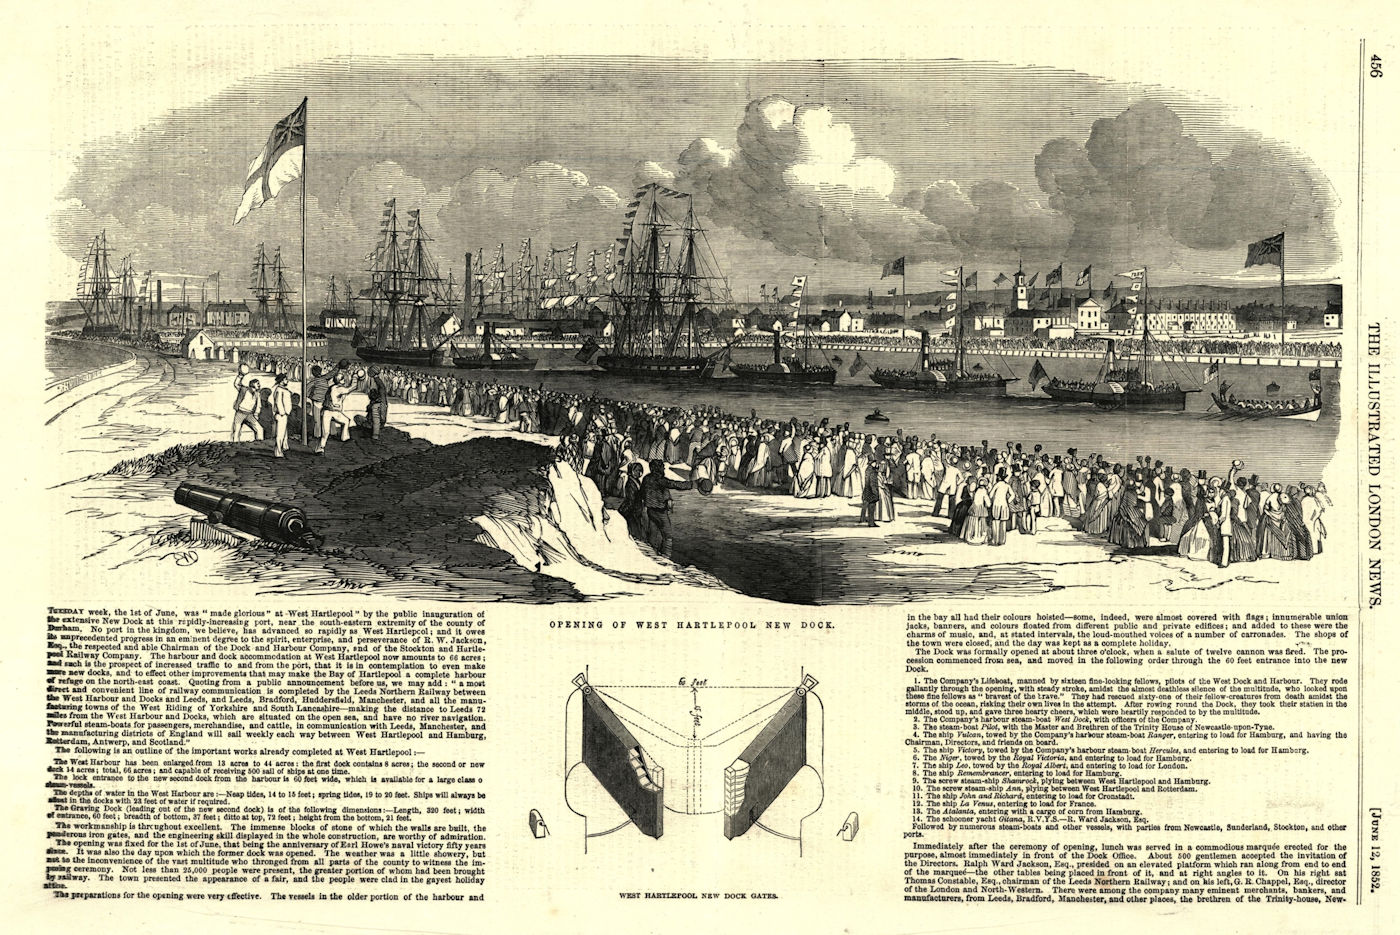 Opening of West Hartlepool new dock. The new dock gates. Durham. Ports 1852